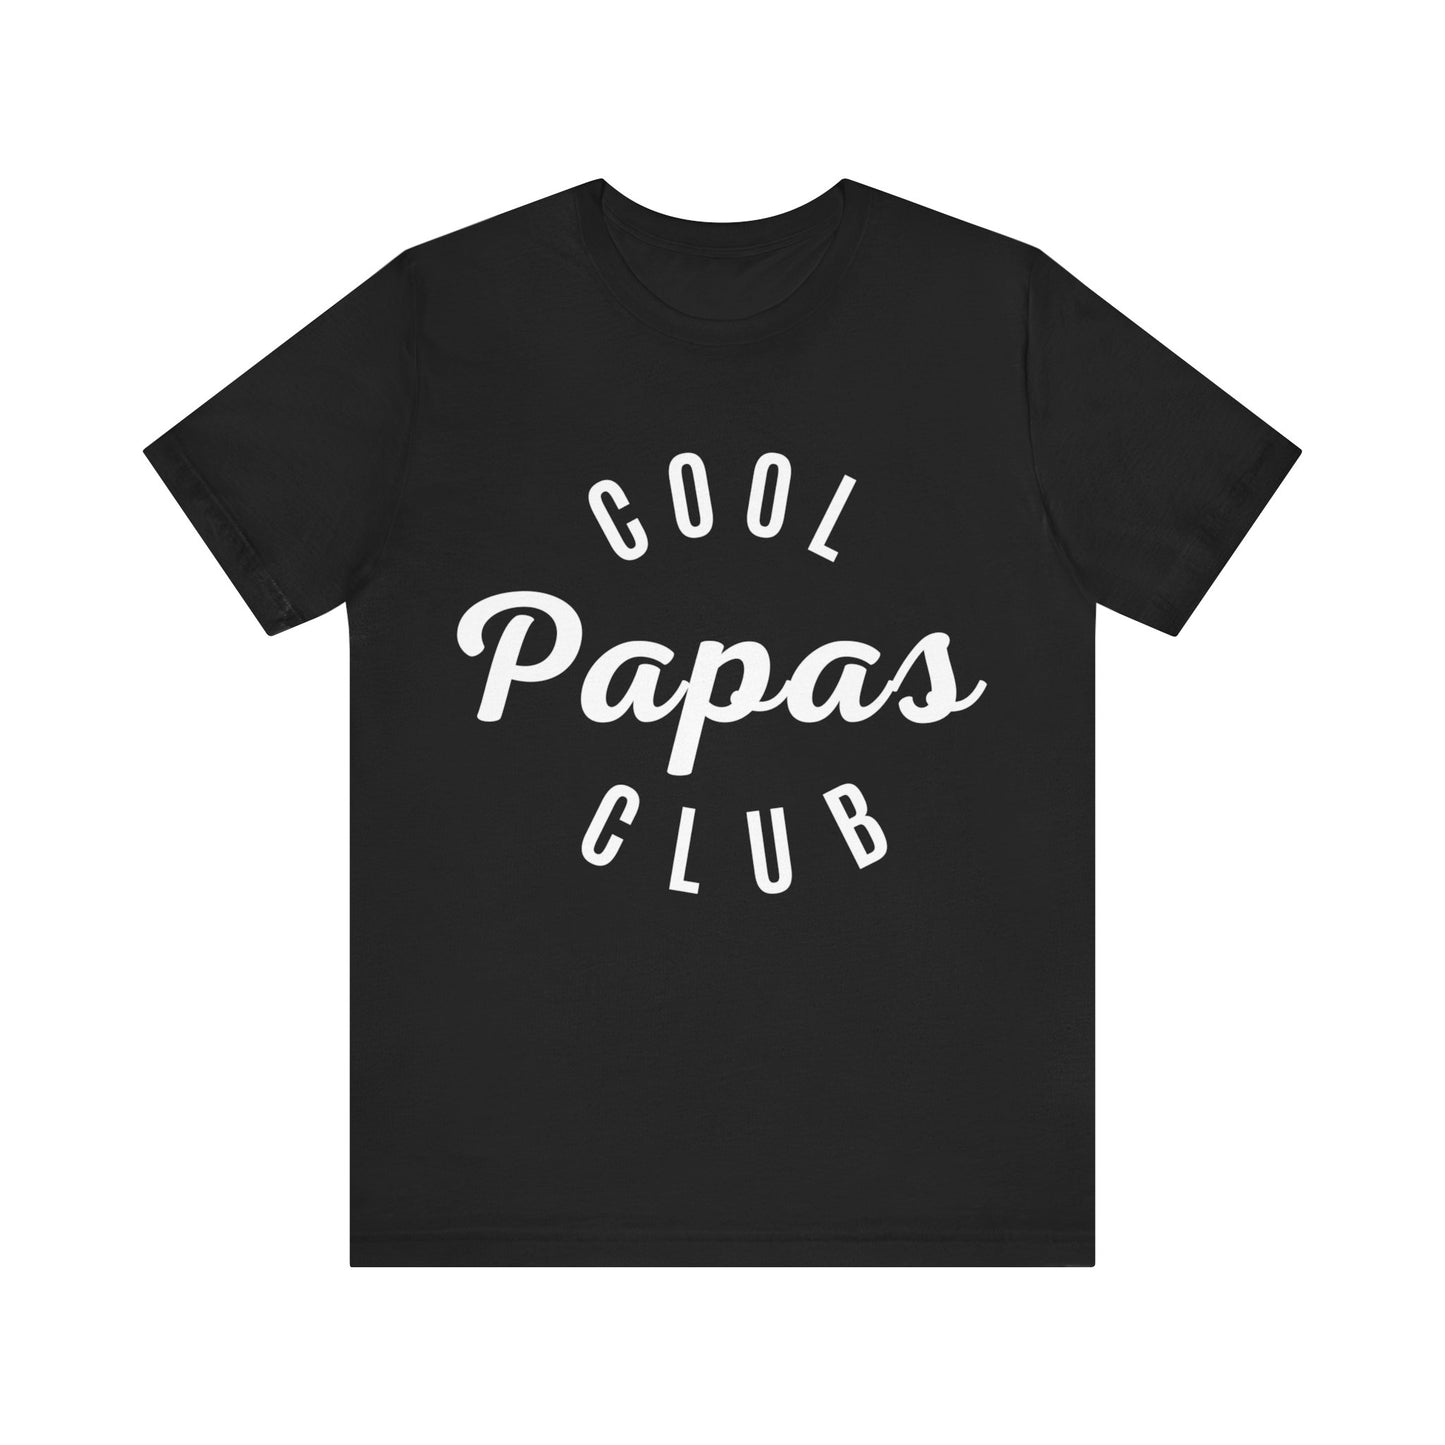 Cool Papas Club Shirt, Pregnancy Announcement TShirt for Dad , Cool Dad T-Shirt for New Dad, Funny Gift for Dad to Be, T1063